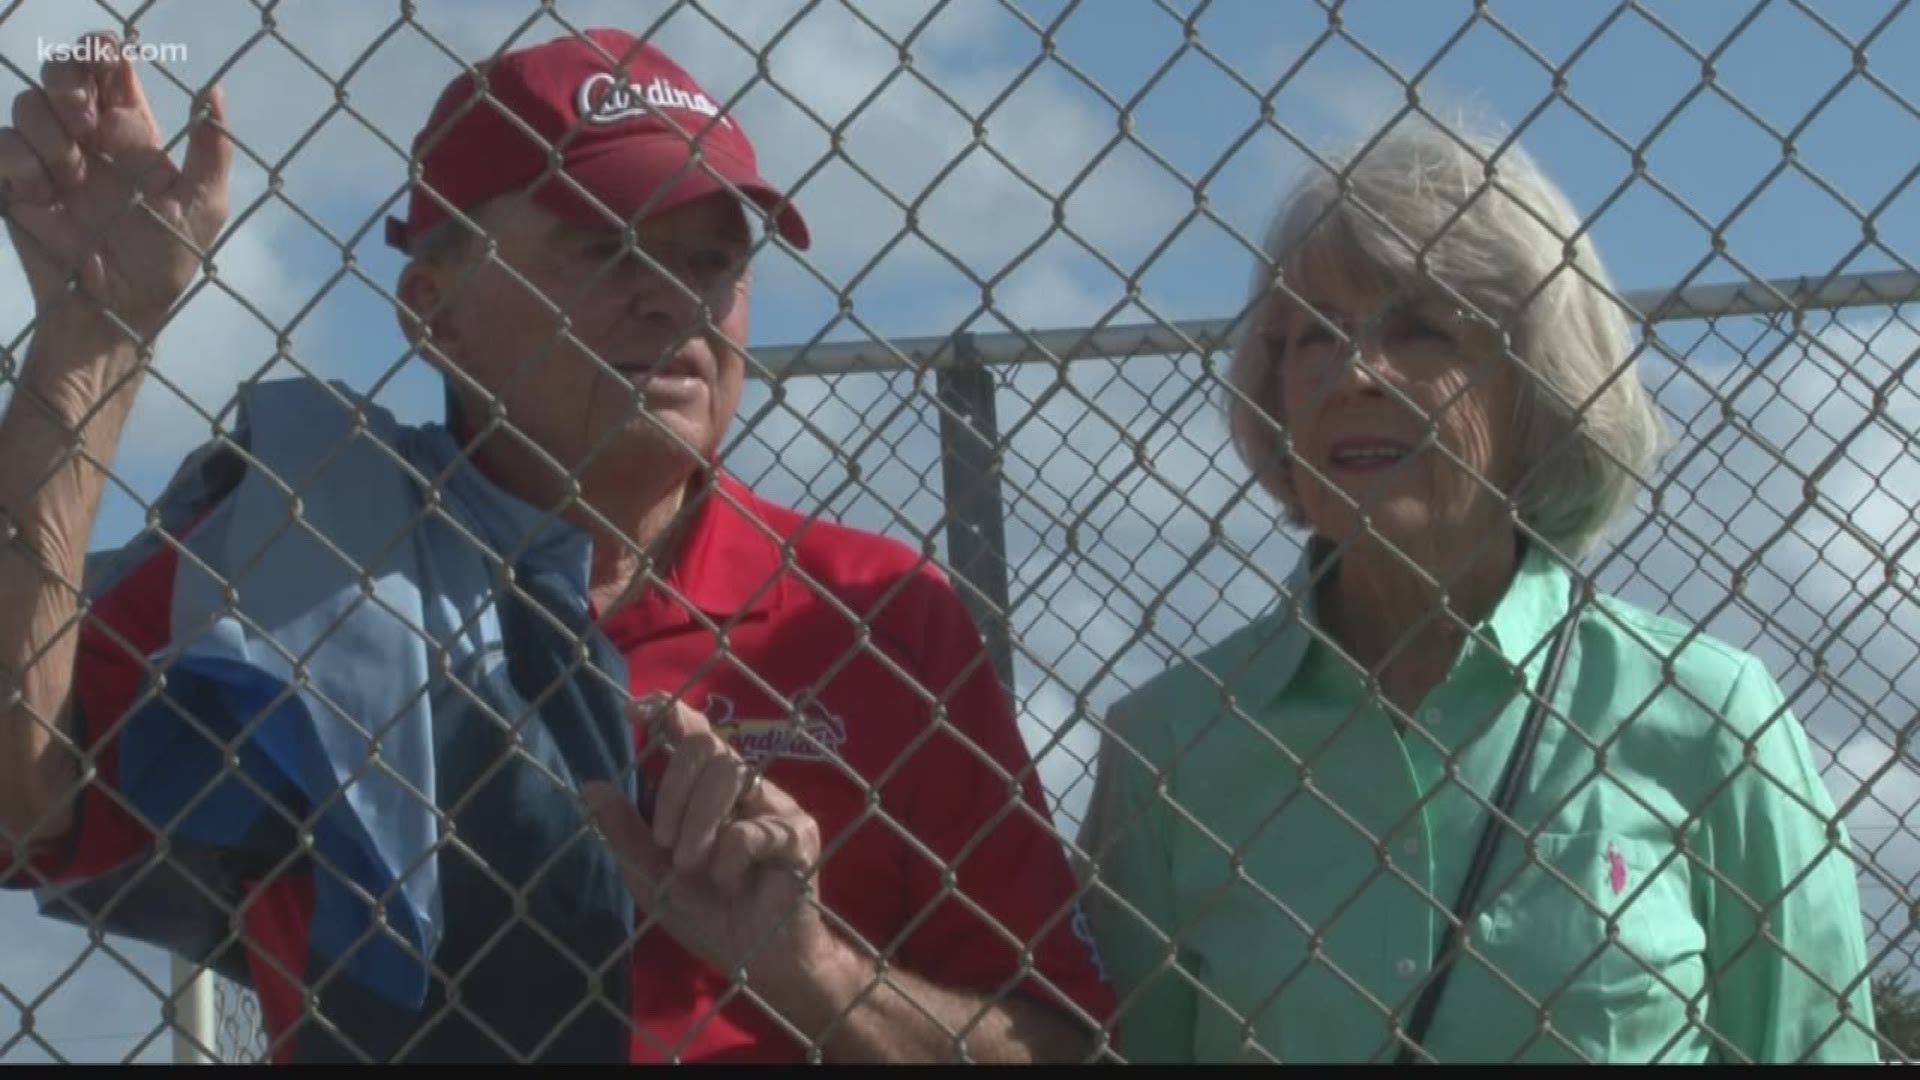 Drenda and Dick Sims have been together for 55 years and they’ve been Cardinals fans forever.